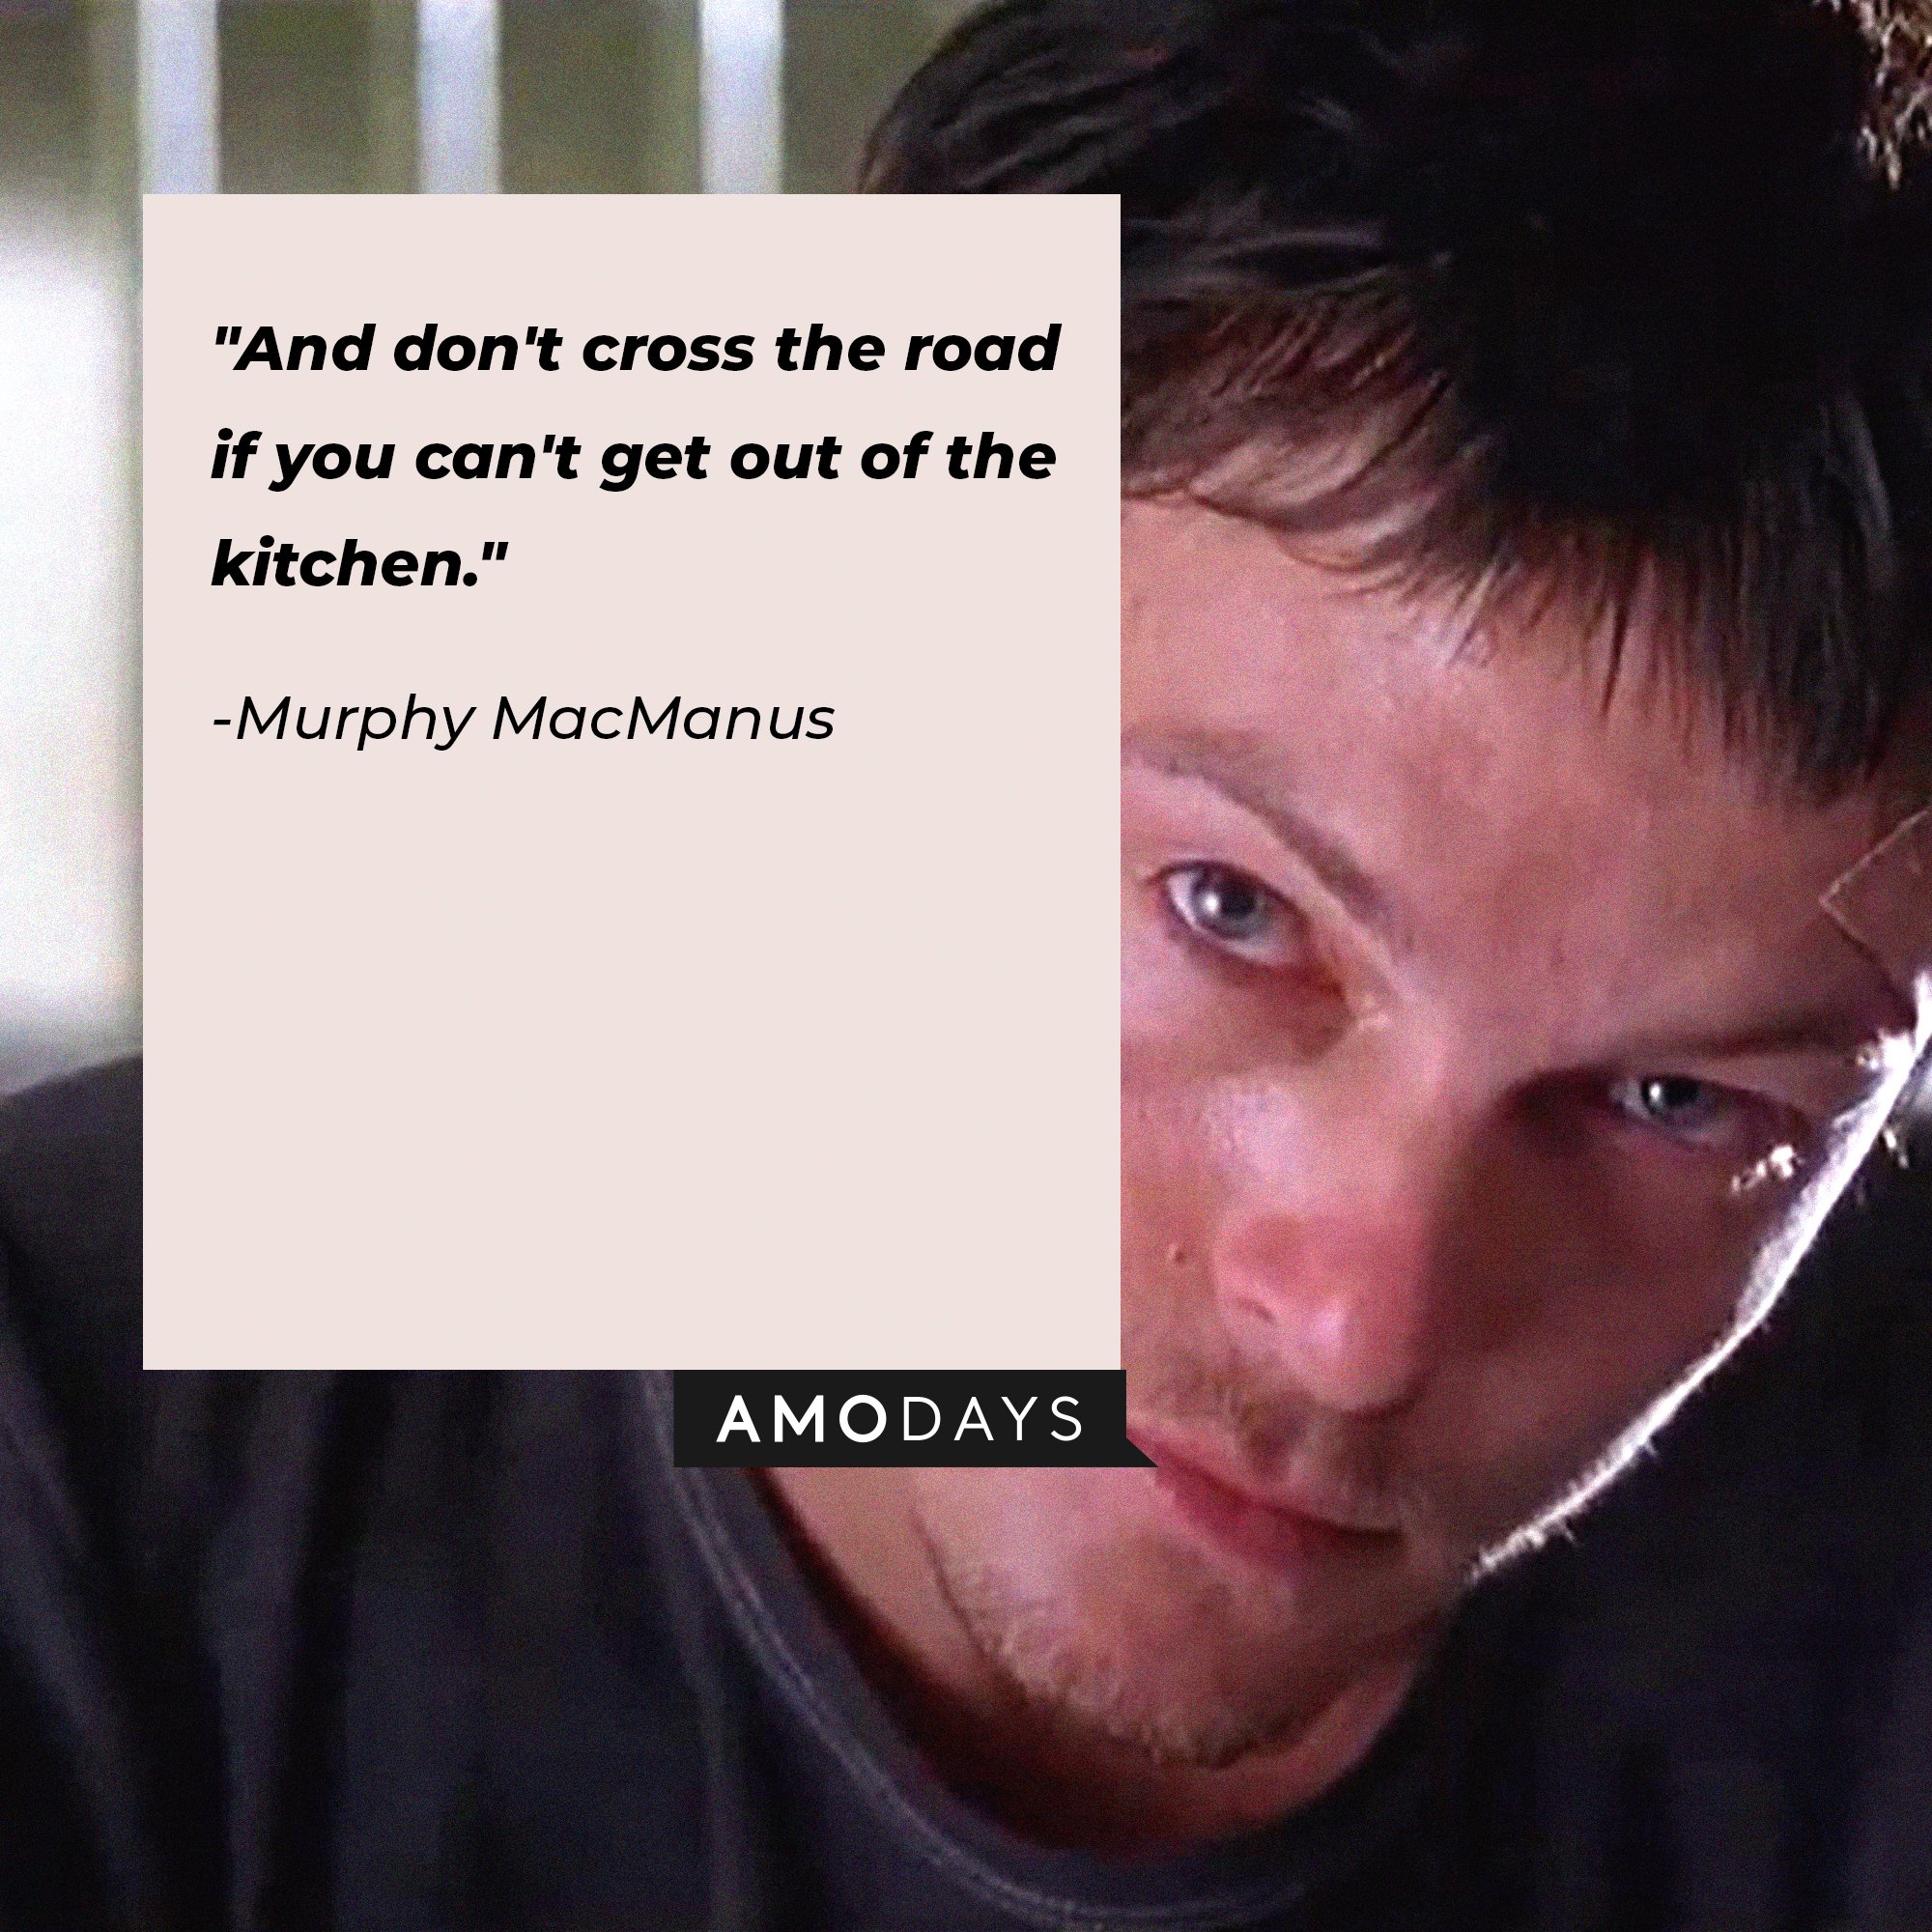 Murphy MacManus' quote: "And don't cross the road if you can't get out of the kitchen." | Image: AmoDays